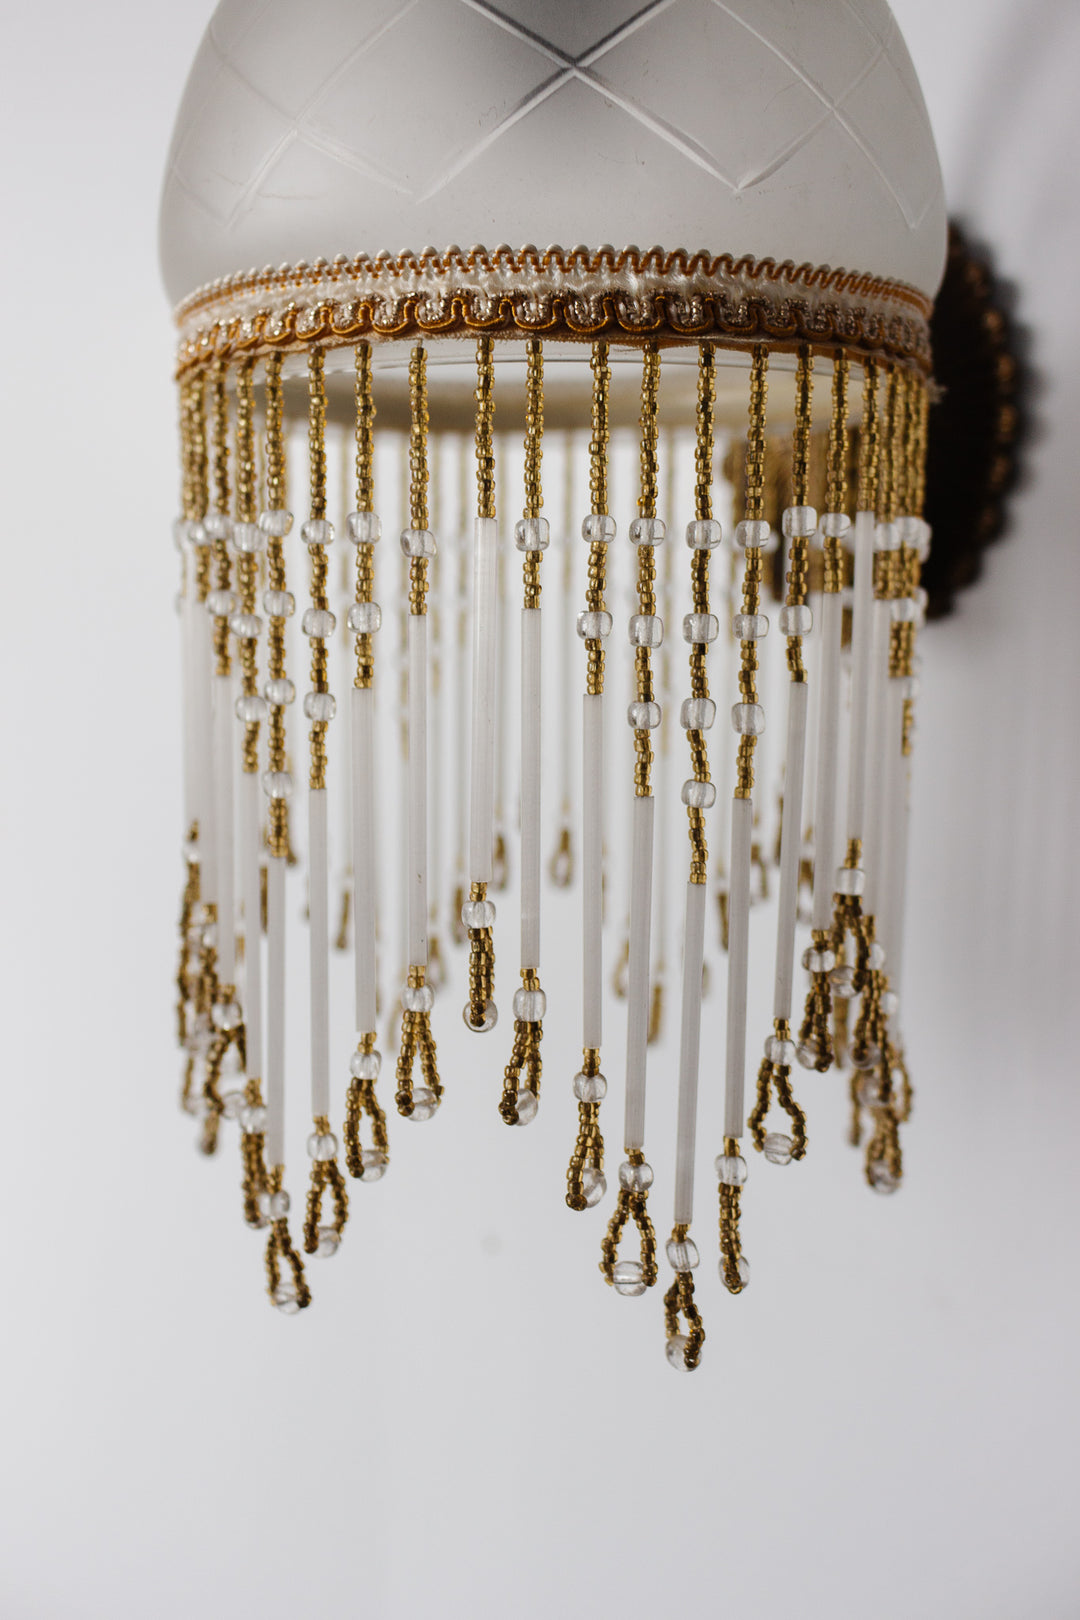 pair of 1930s french art deco wall sconces with glass bead fringe